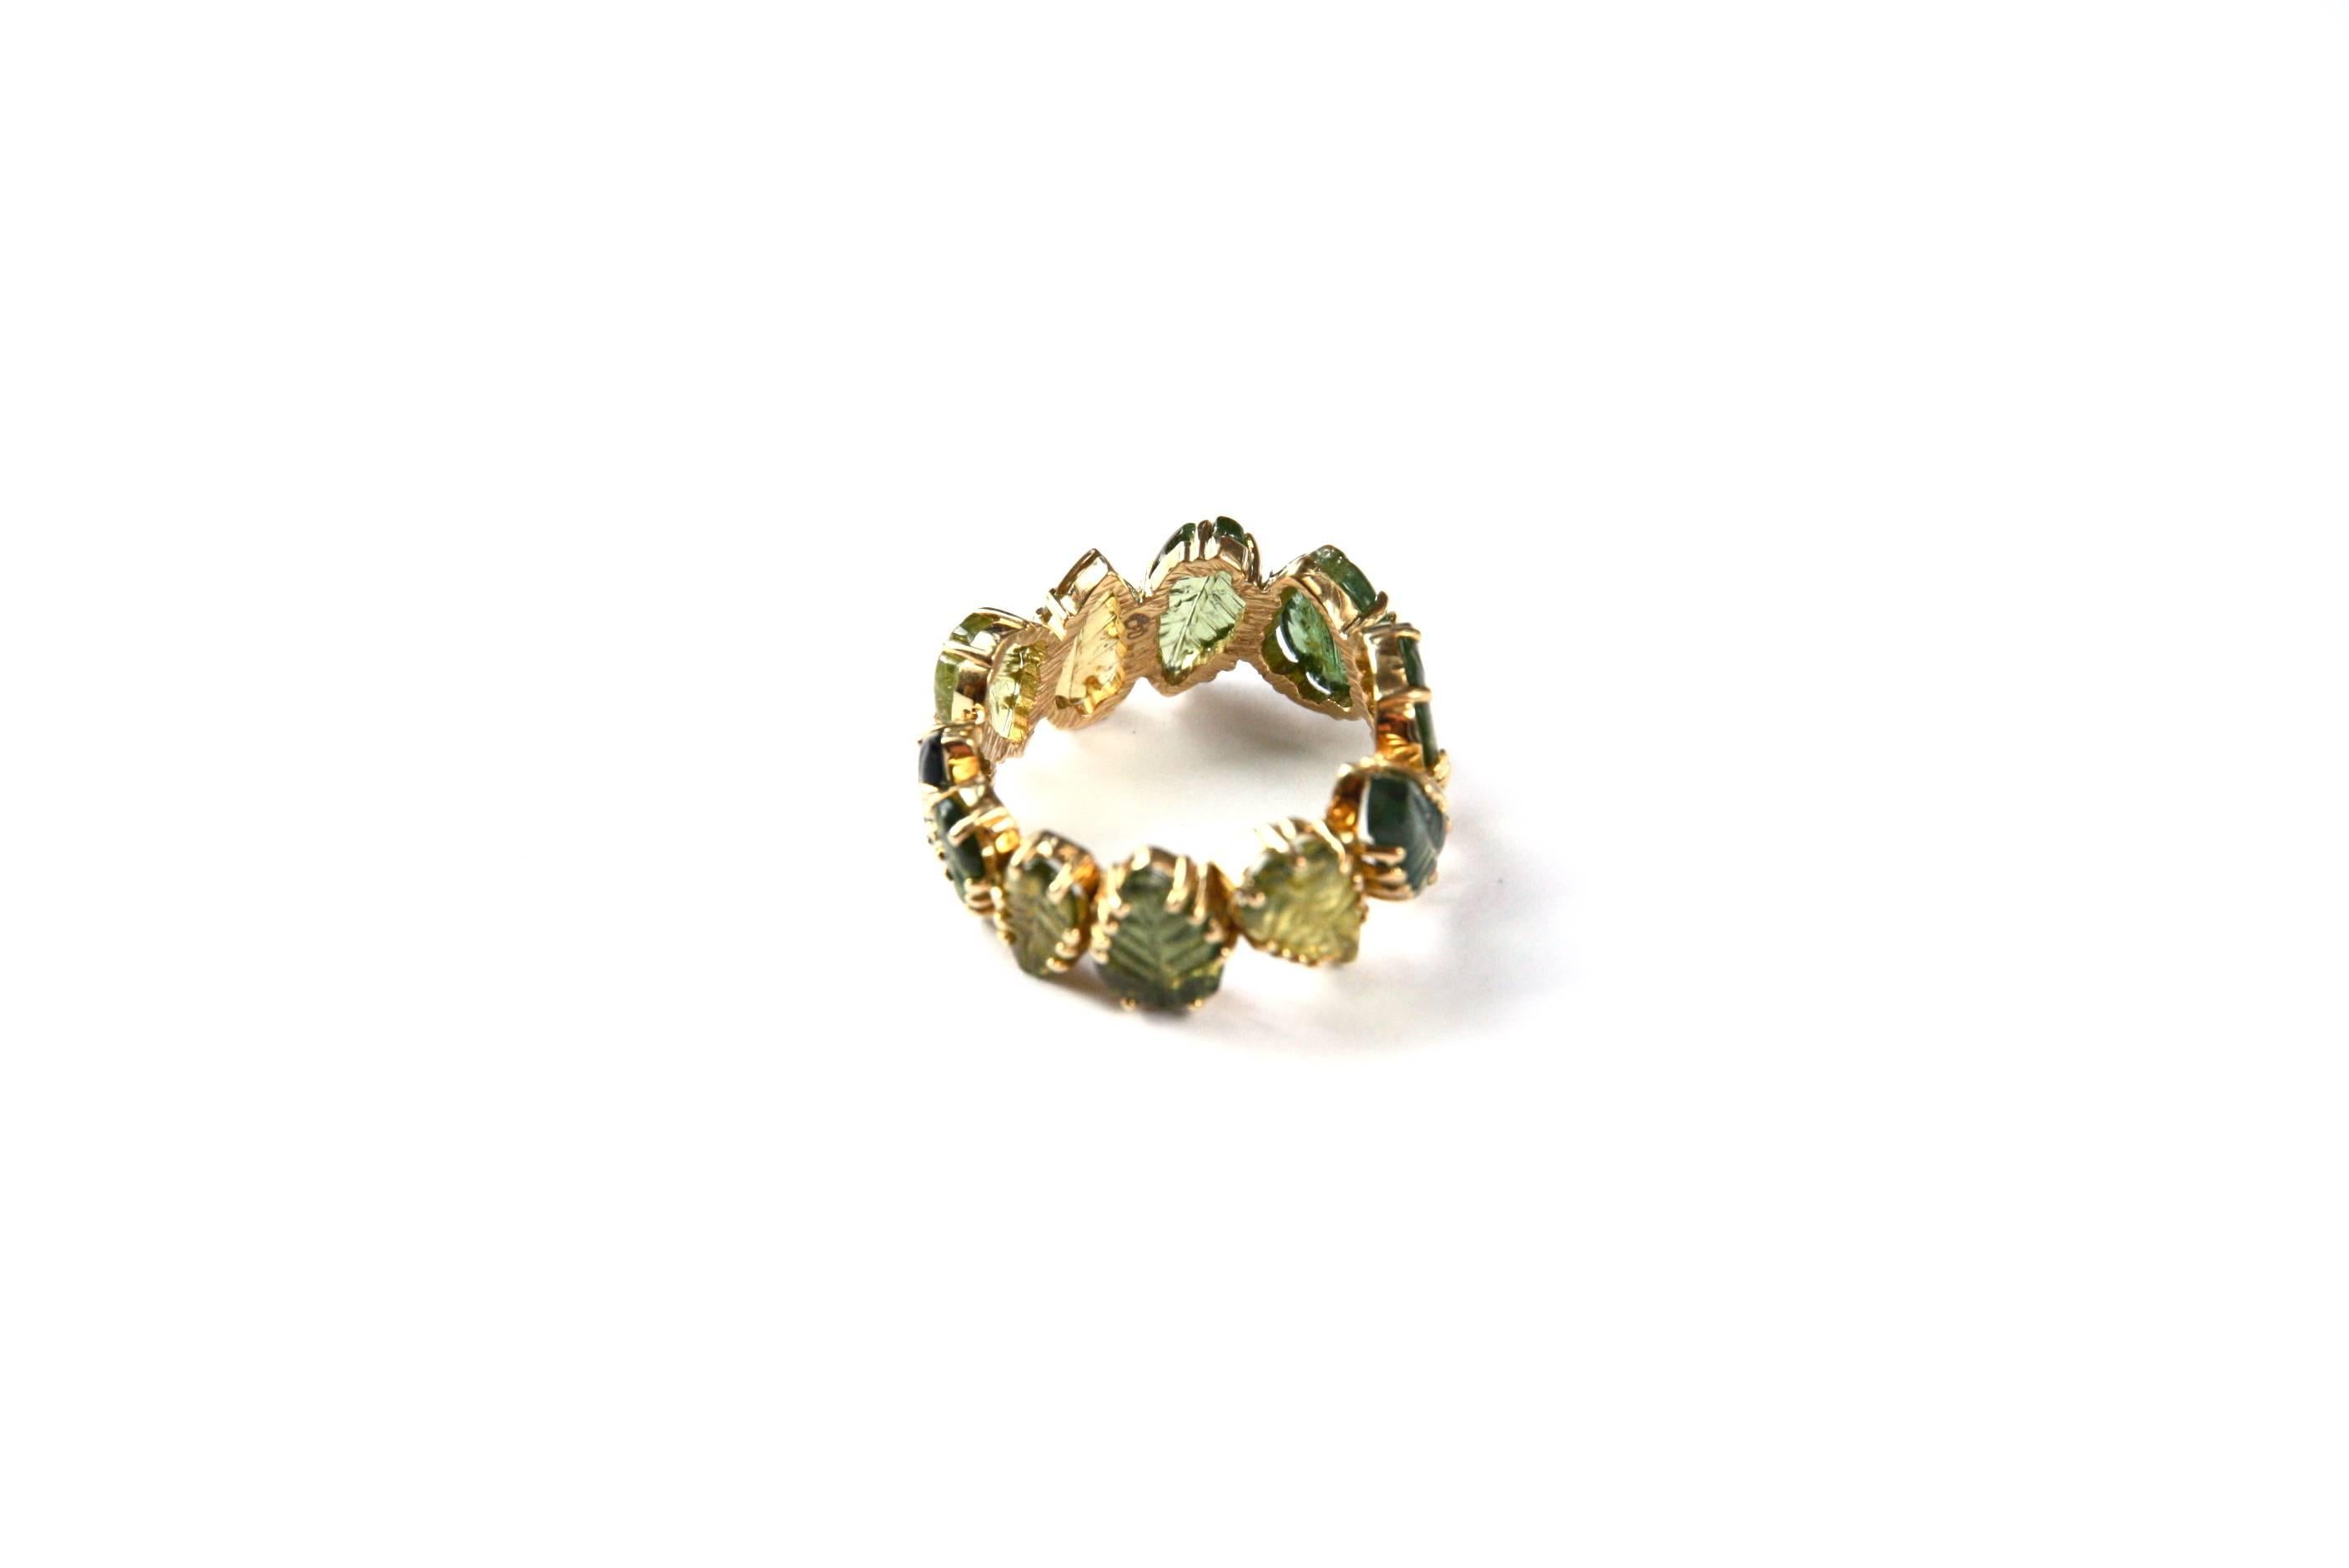 Very special band ring size 13 eu with different shape and color green  tourmaline cts 2,80, linked with yellow  18 kt gold gr. 5,00.
All Giulia Colussi jewelry is new and has never been previously owned or worn. Each item will arrive at your door